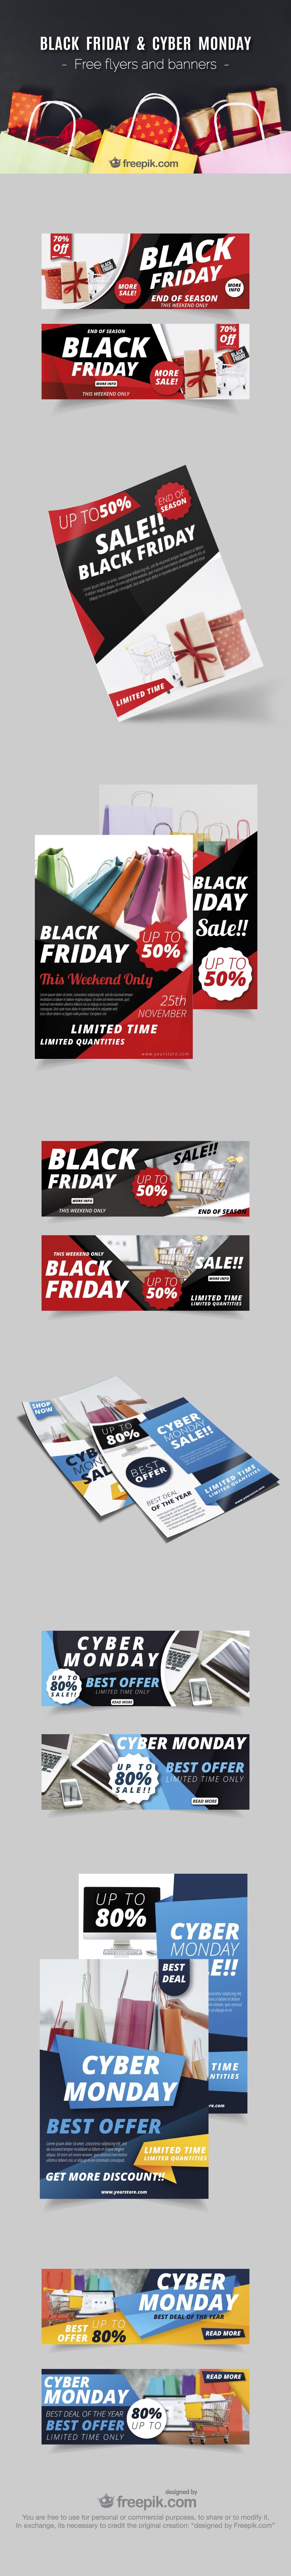 Black Friday Flyers and websites banners